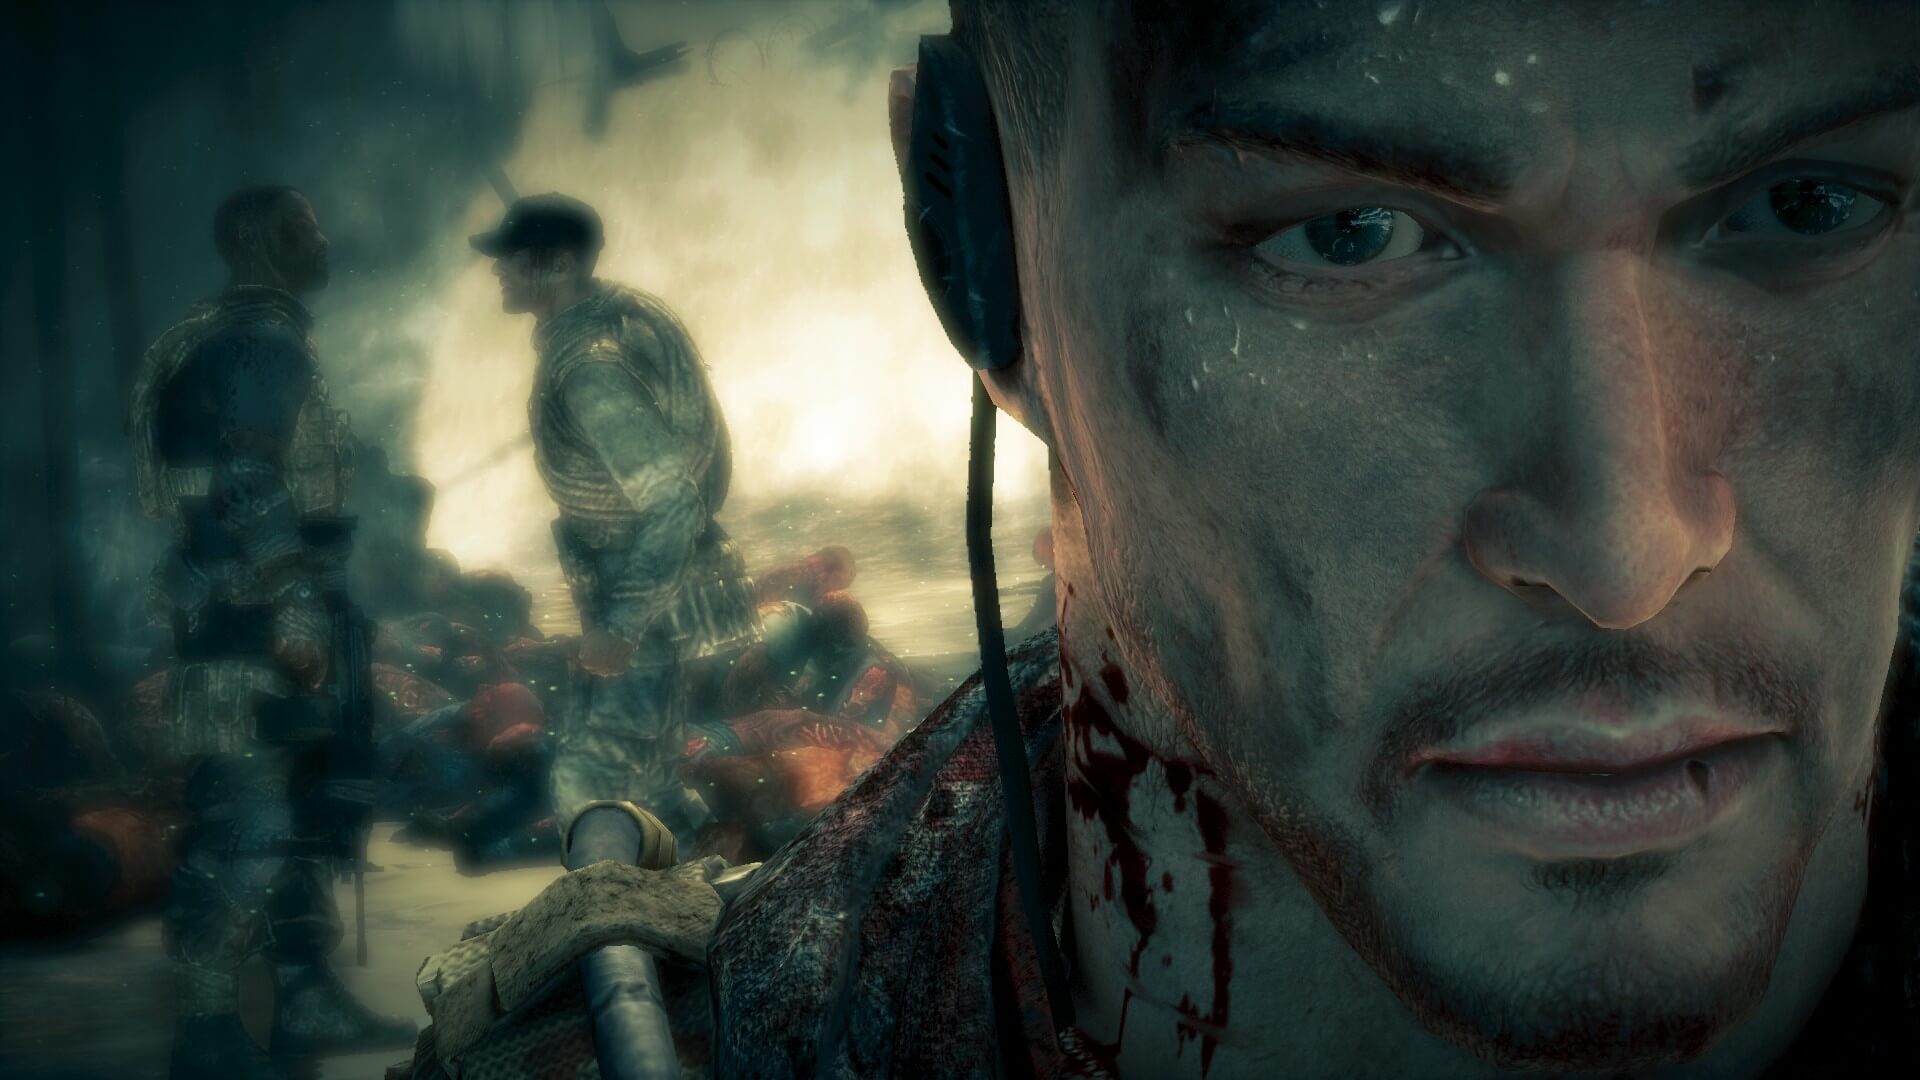 A cutscene of Spec Ops: The Line, showing Captain Walker staring while Lieutenant Adams and Staff Sgt. Lugo argue behind him.